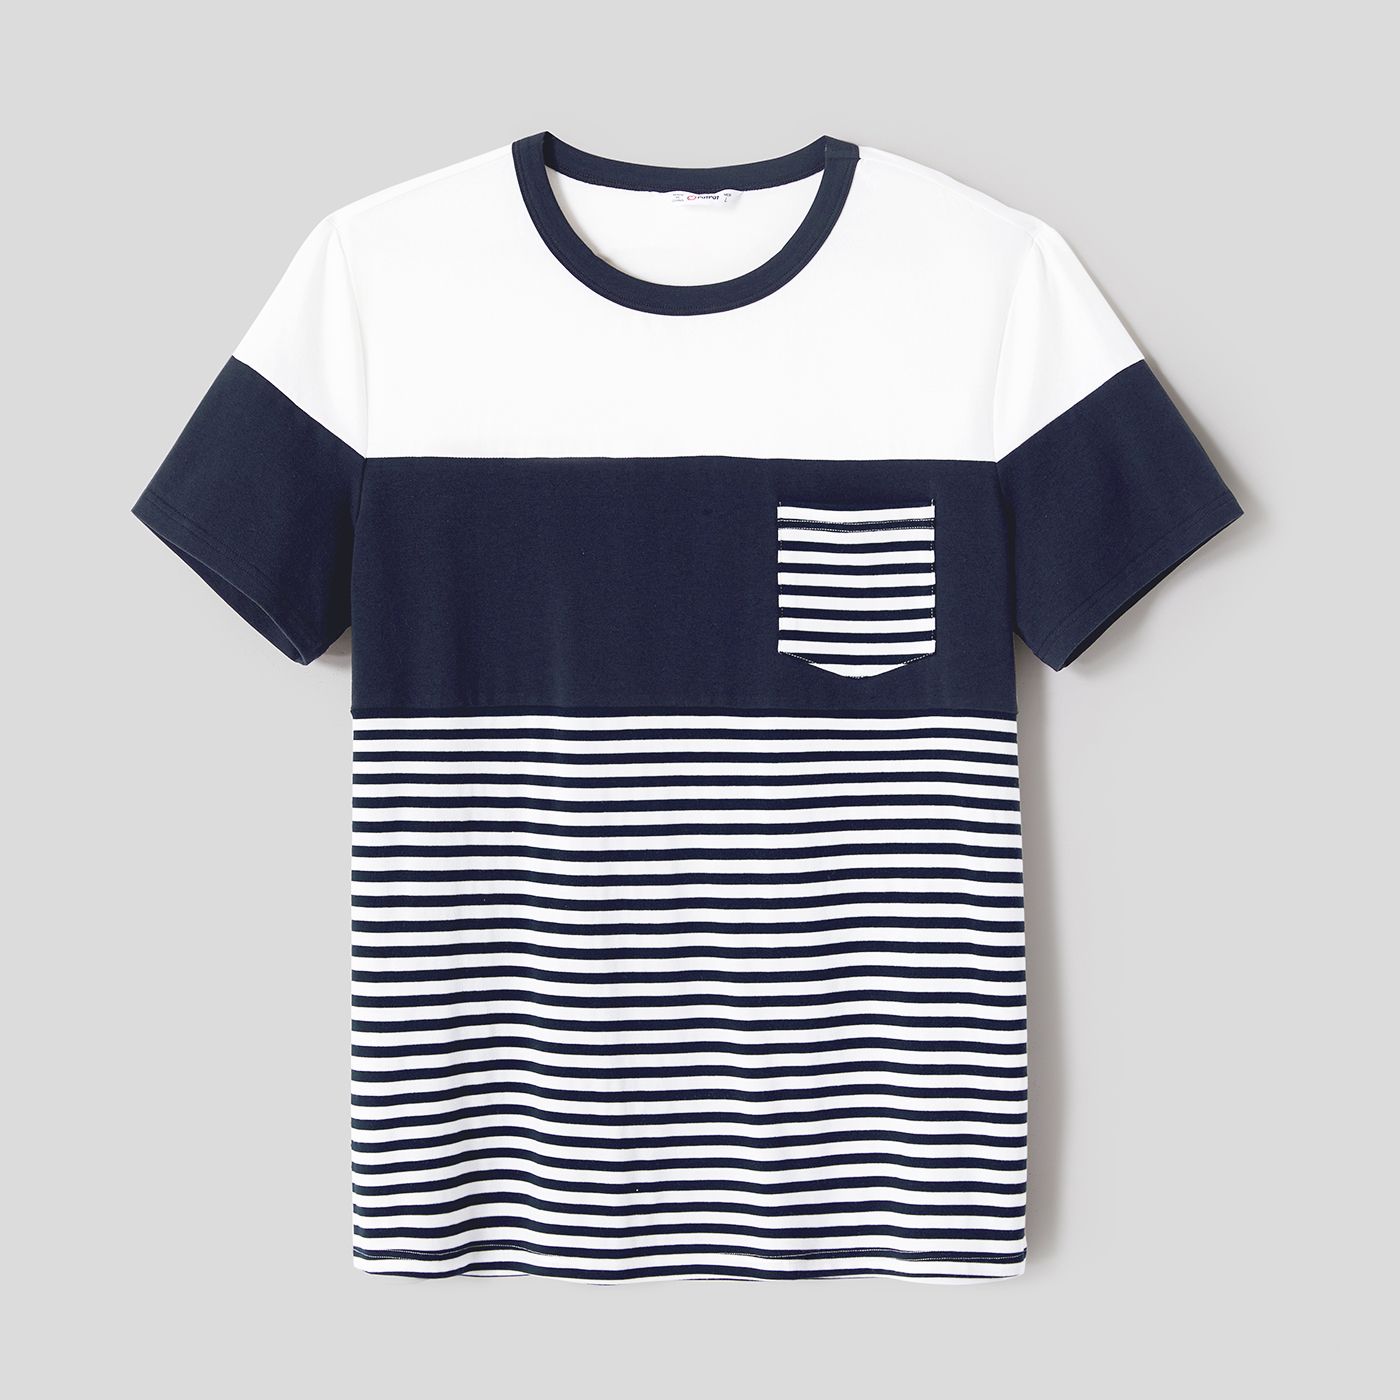 Family Matching Cotton Colorblock Striped Short-sleeve Tee And Spliced Tank Dresses Sets